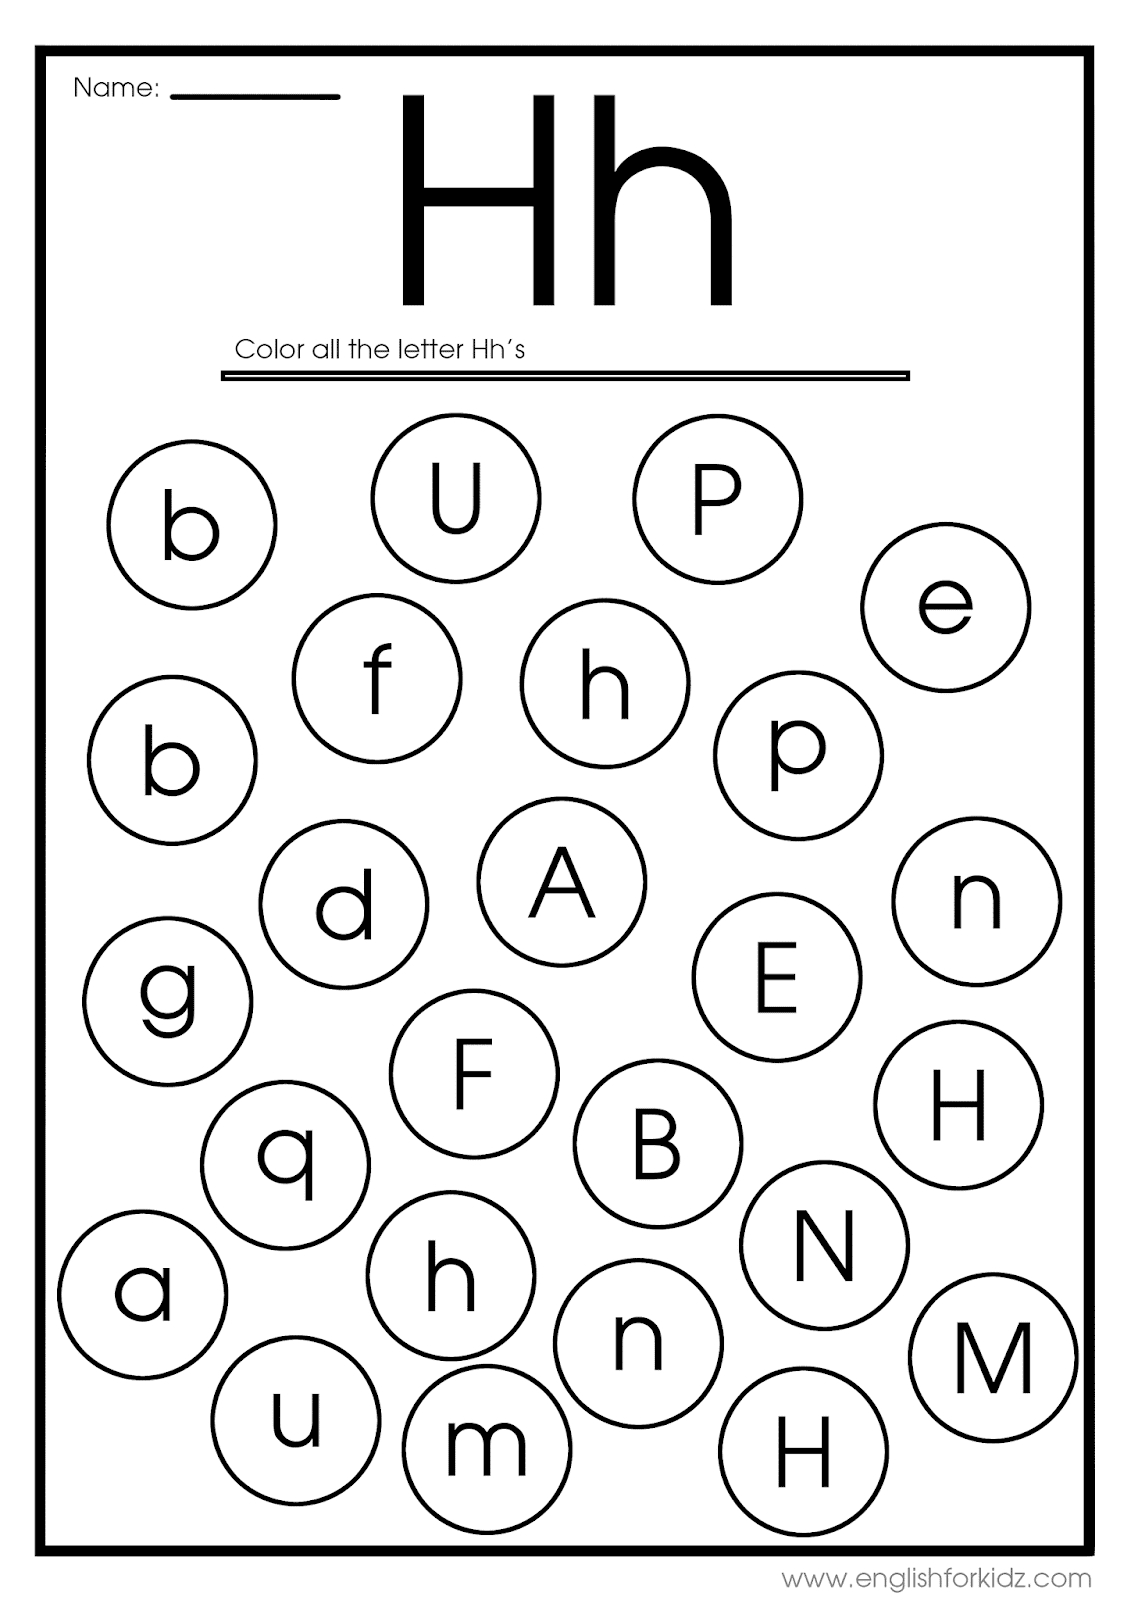 Letter H Worksheets, Flash Cards, Coloring Pages with regard to H Letter Worksheets